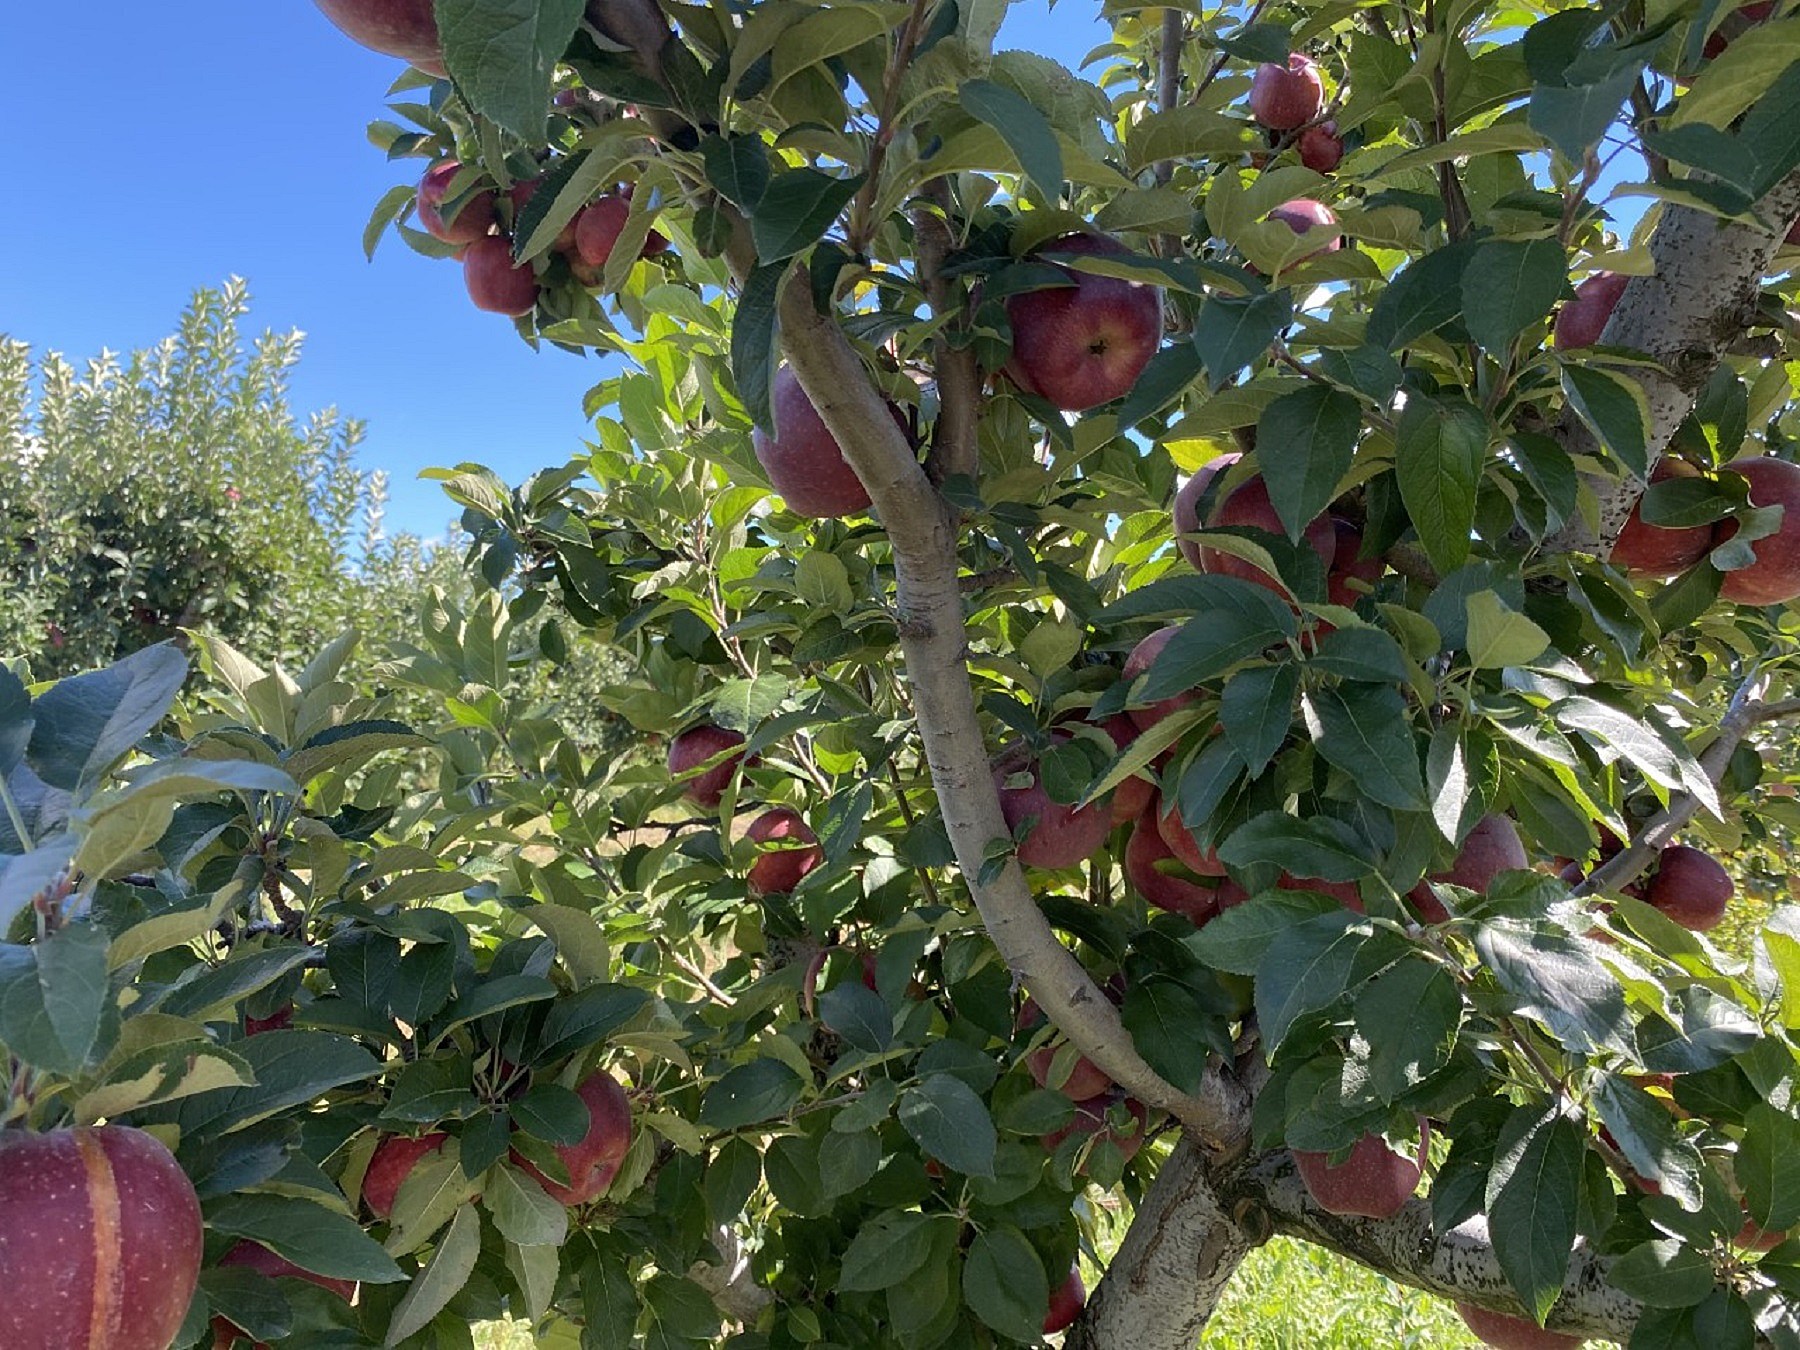 The best places to go apple picking in New Jersey